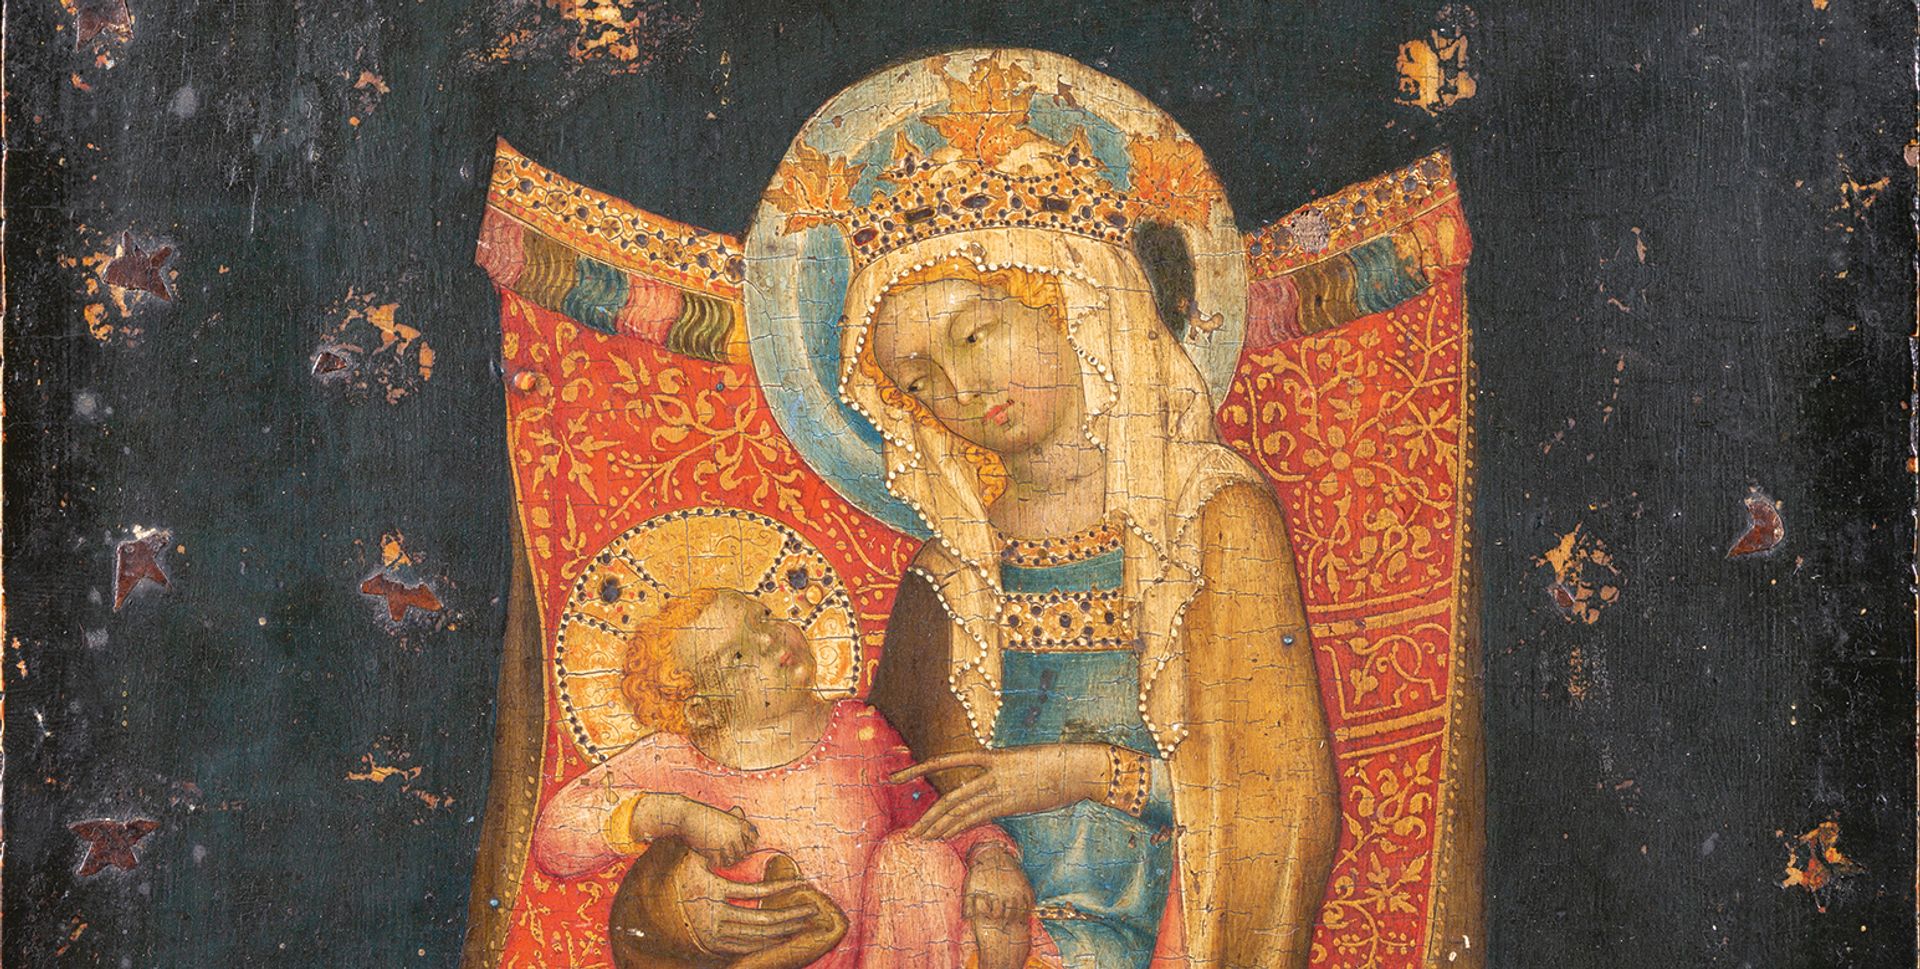 Virgin and Child Enthroned (around 1350) by the Master of Vyšší Brod was acquired by The Metropolitan Museum of Art Cortot & Associés